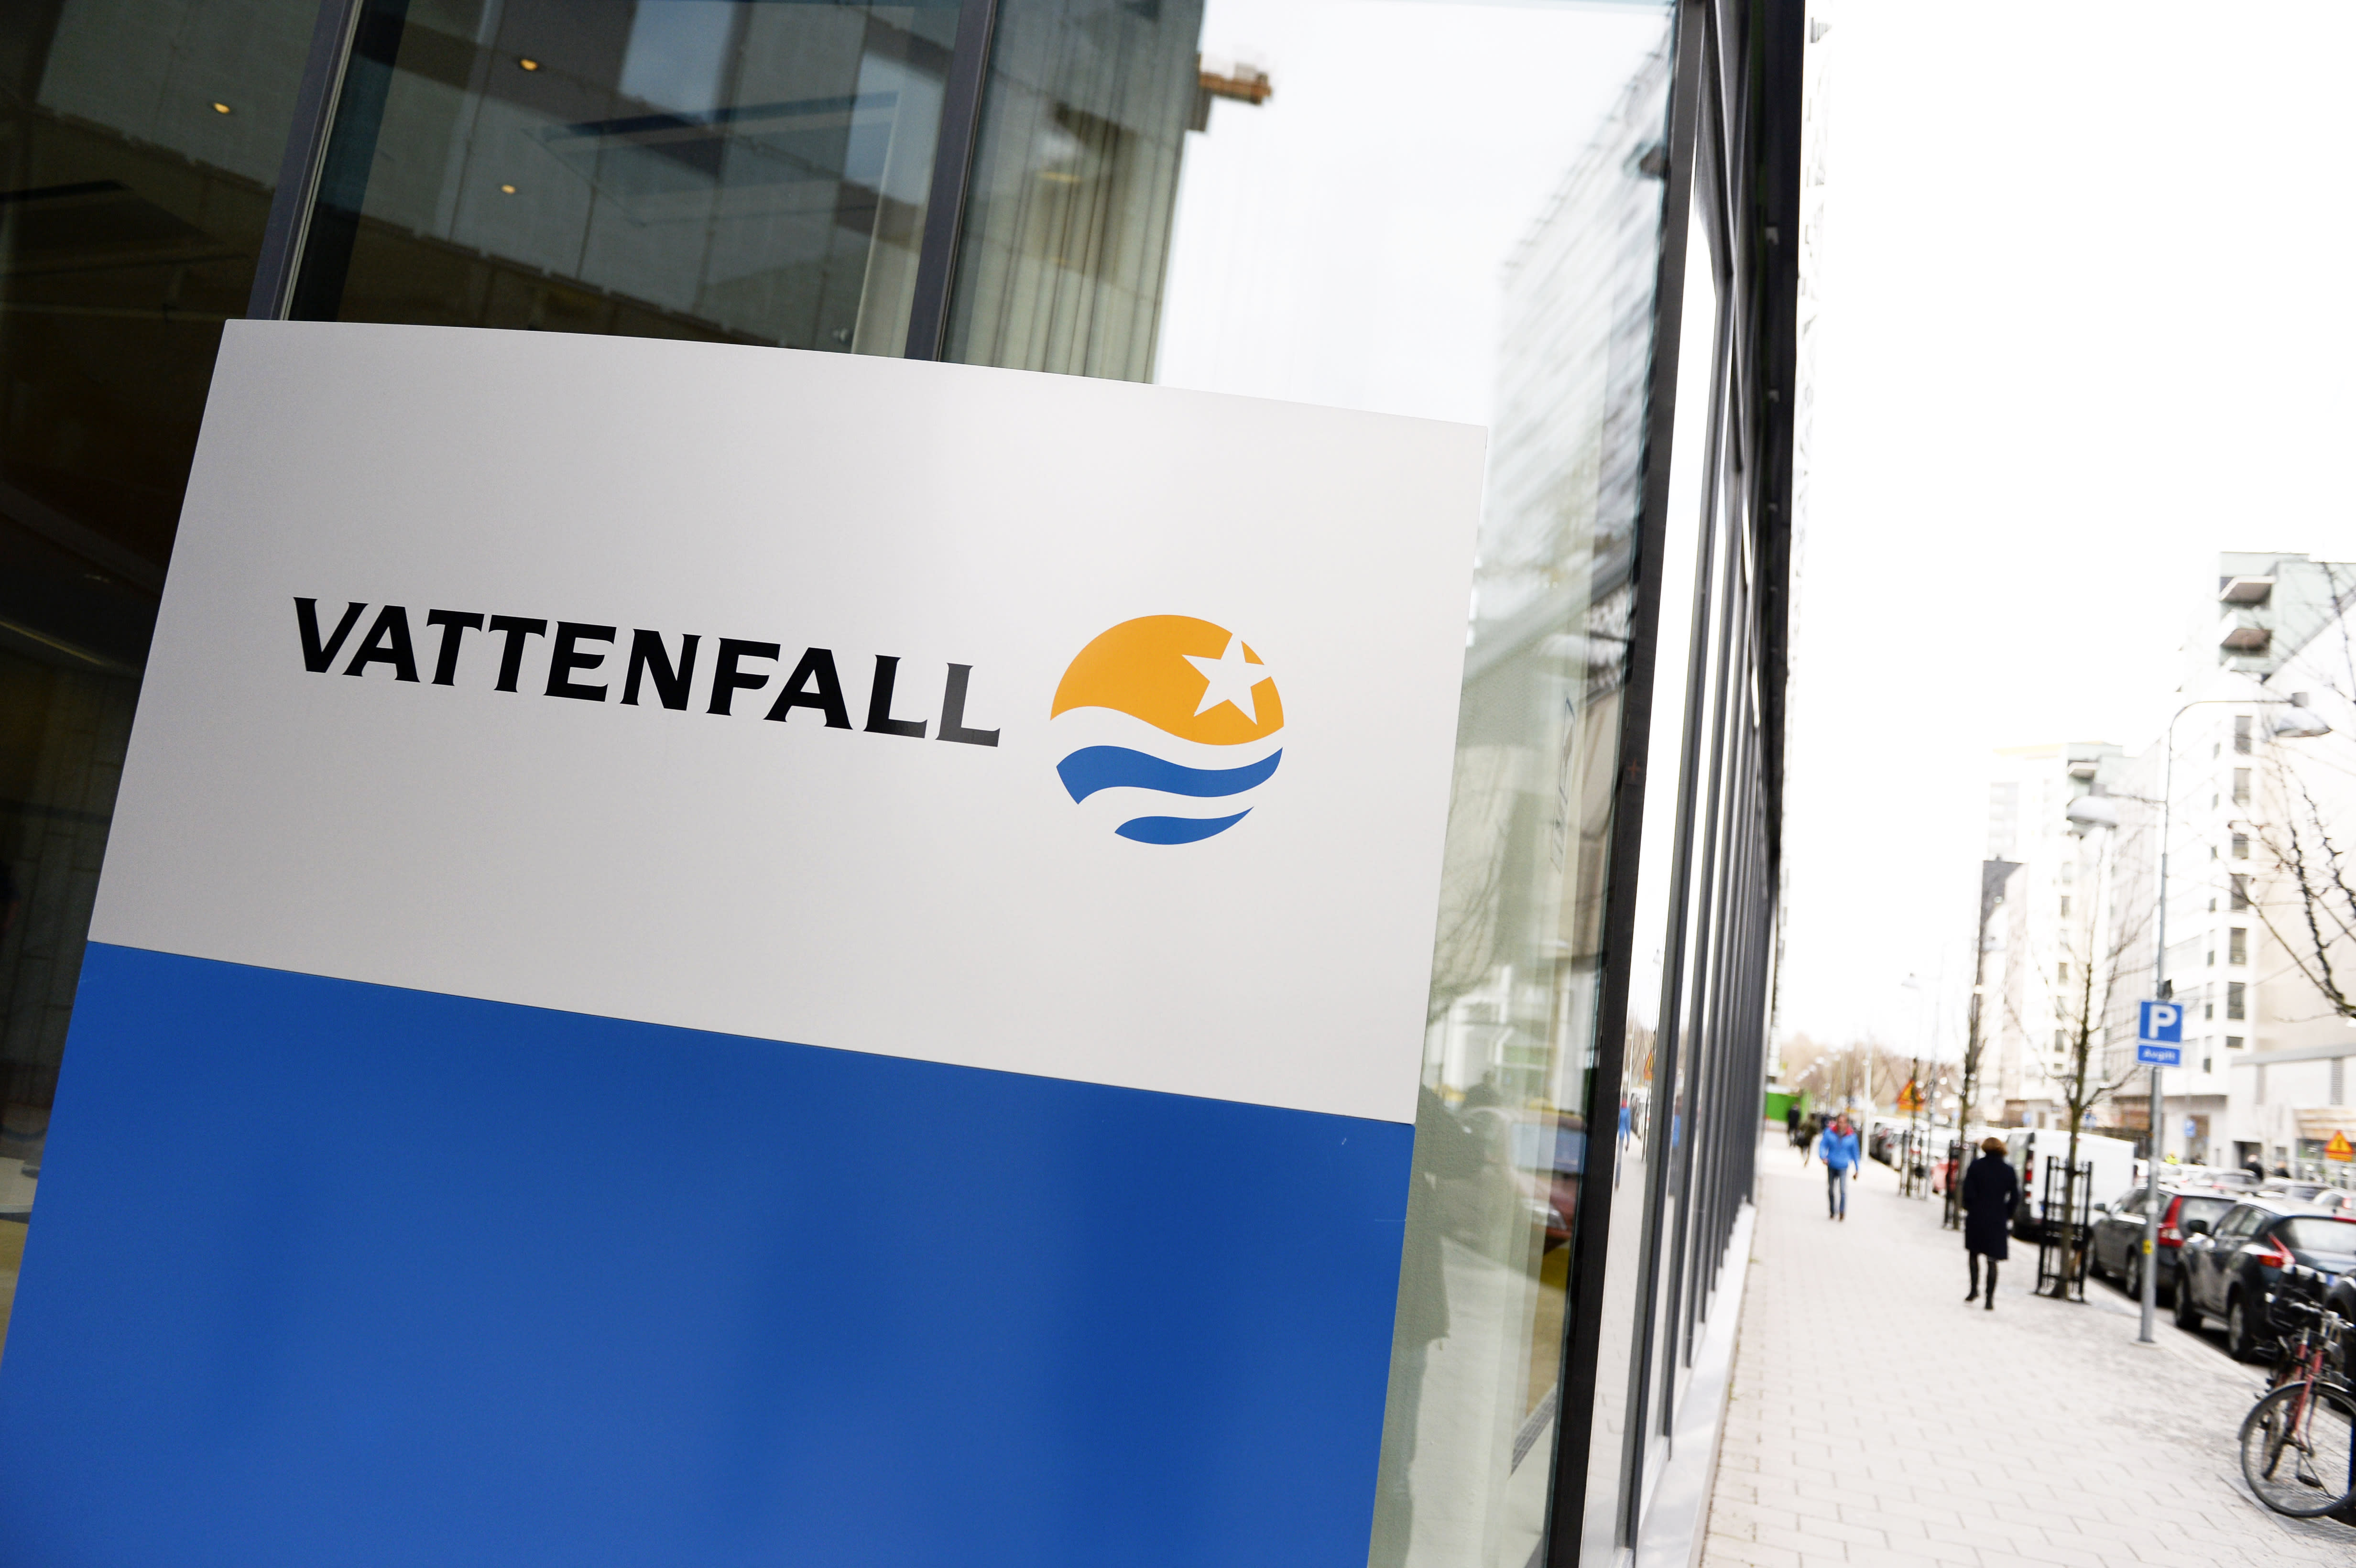 Energy authority: Vattenfall manipulates electricity prices, but does not receive fines